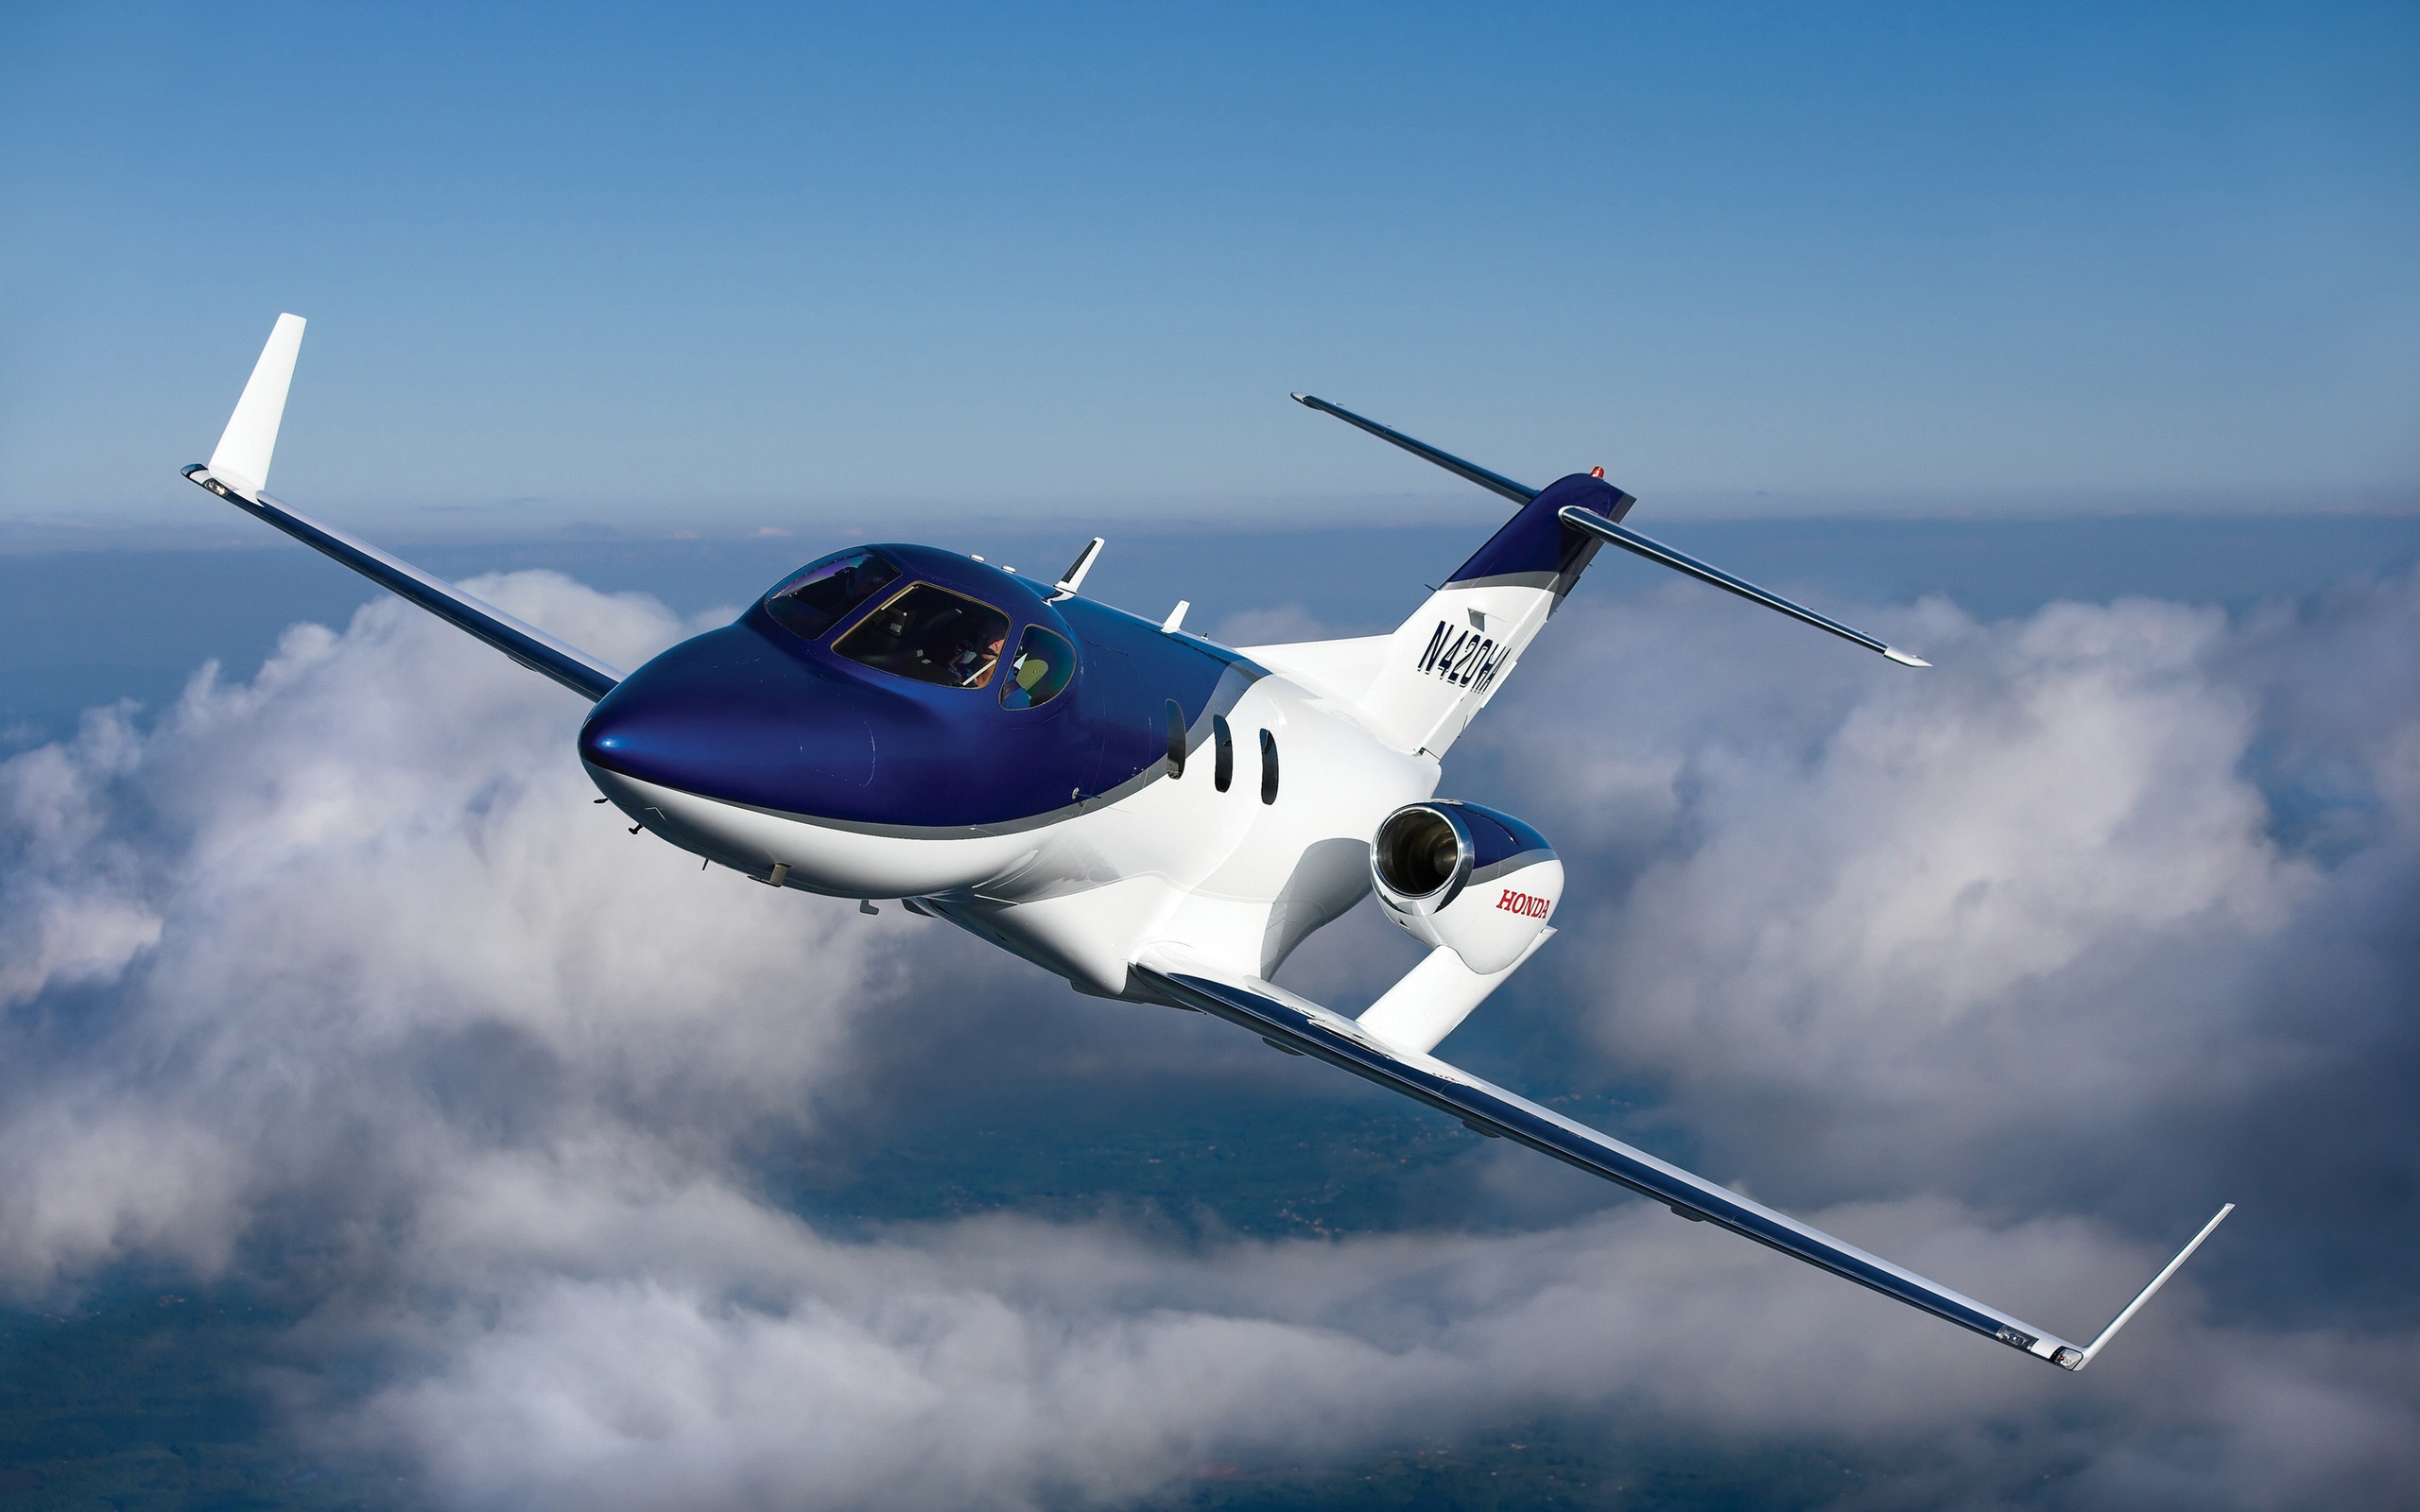 First General Aviation Aircraft Developed By The Honda Motor Pany